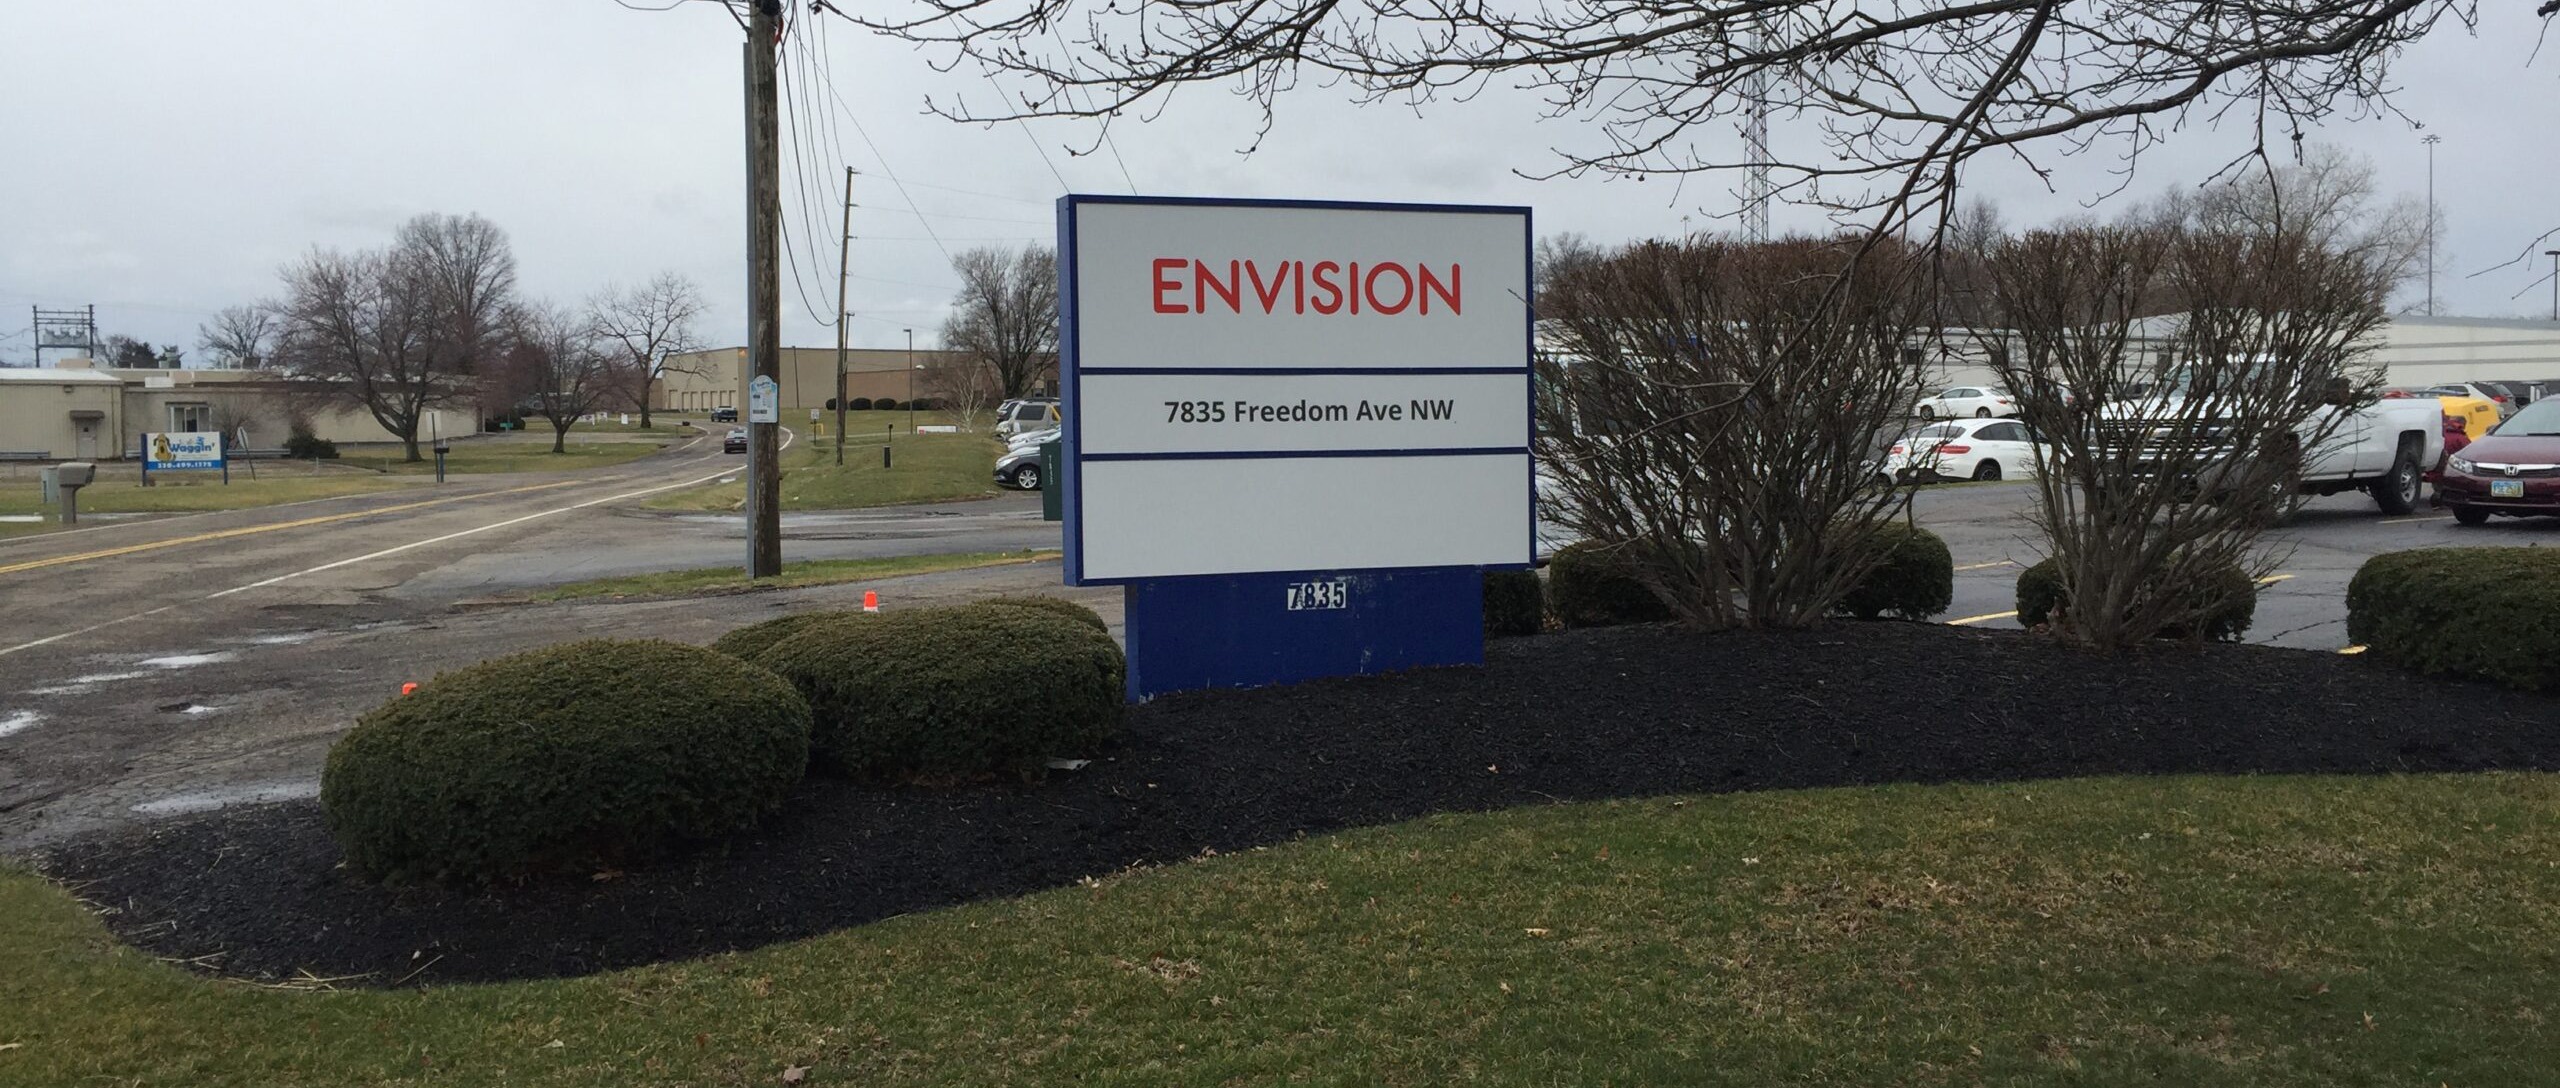 Envision Outdoor Company Sign in front of parking lot.